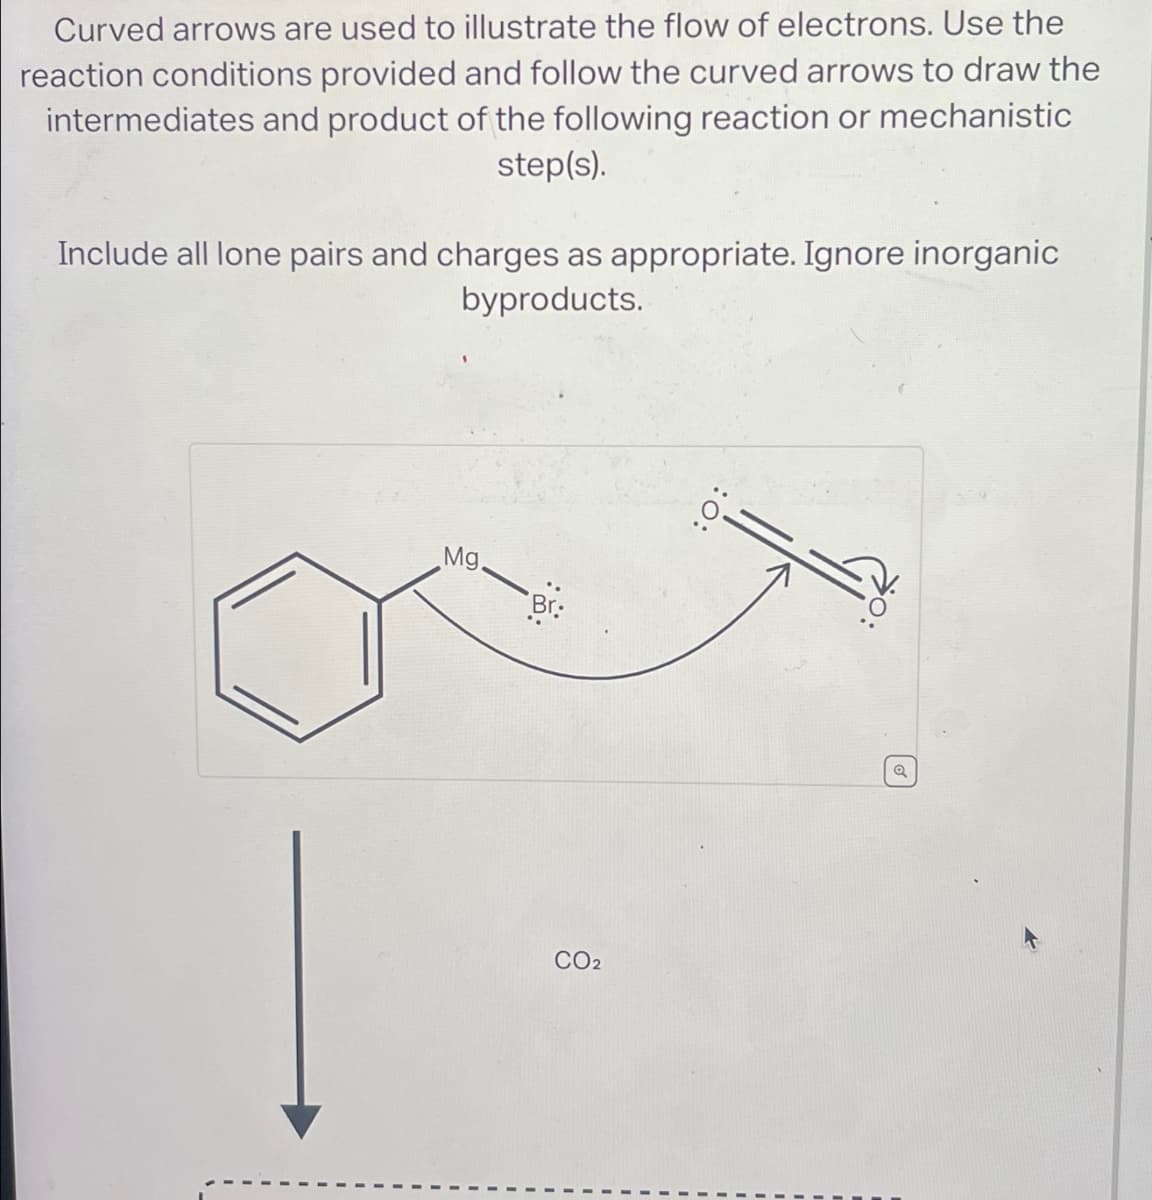 Curved arrows are used to illustrate the flow of electrons. Use the
reaction conditions provided and follow the curved arrows to draw the
intermediates and product of the following reaction or mechanistic
step(s).
Include all lone pairs and charges as appropriate. Ignore inorganic
byproducts.
Mg
Br
:0:
CO2
Q